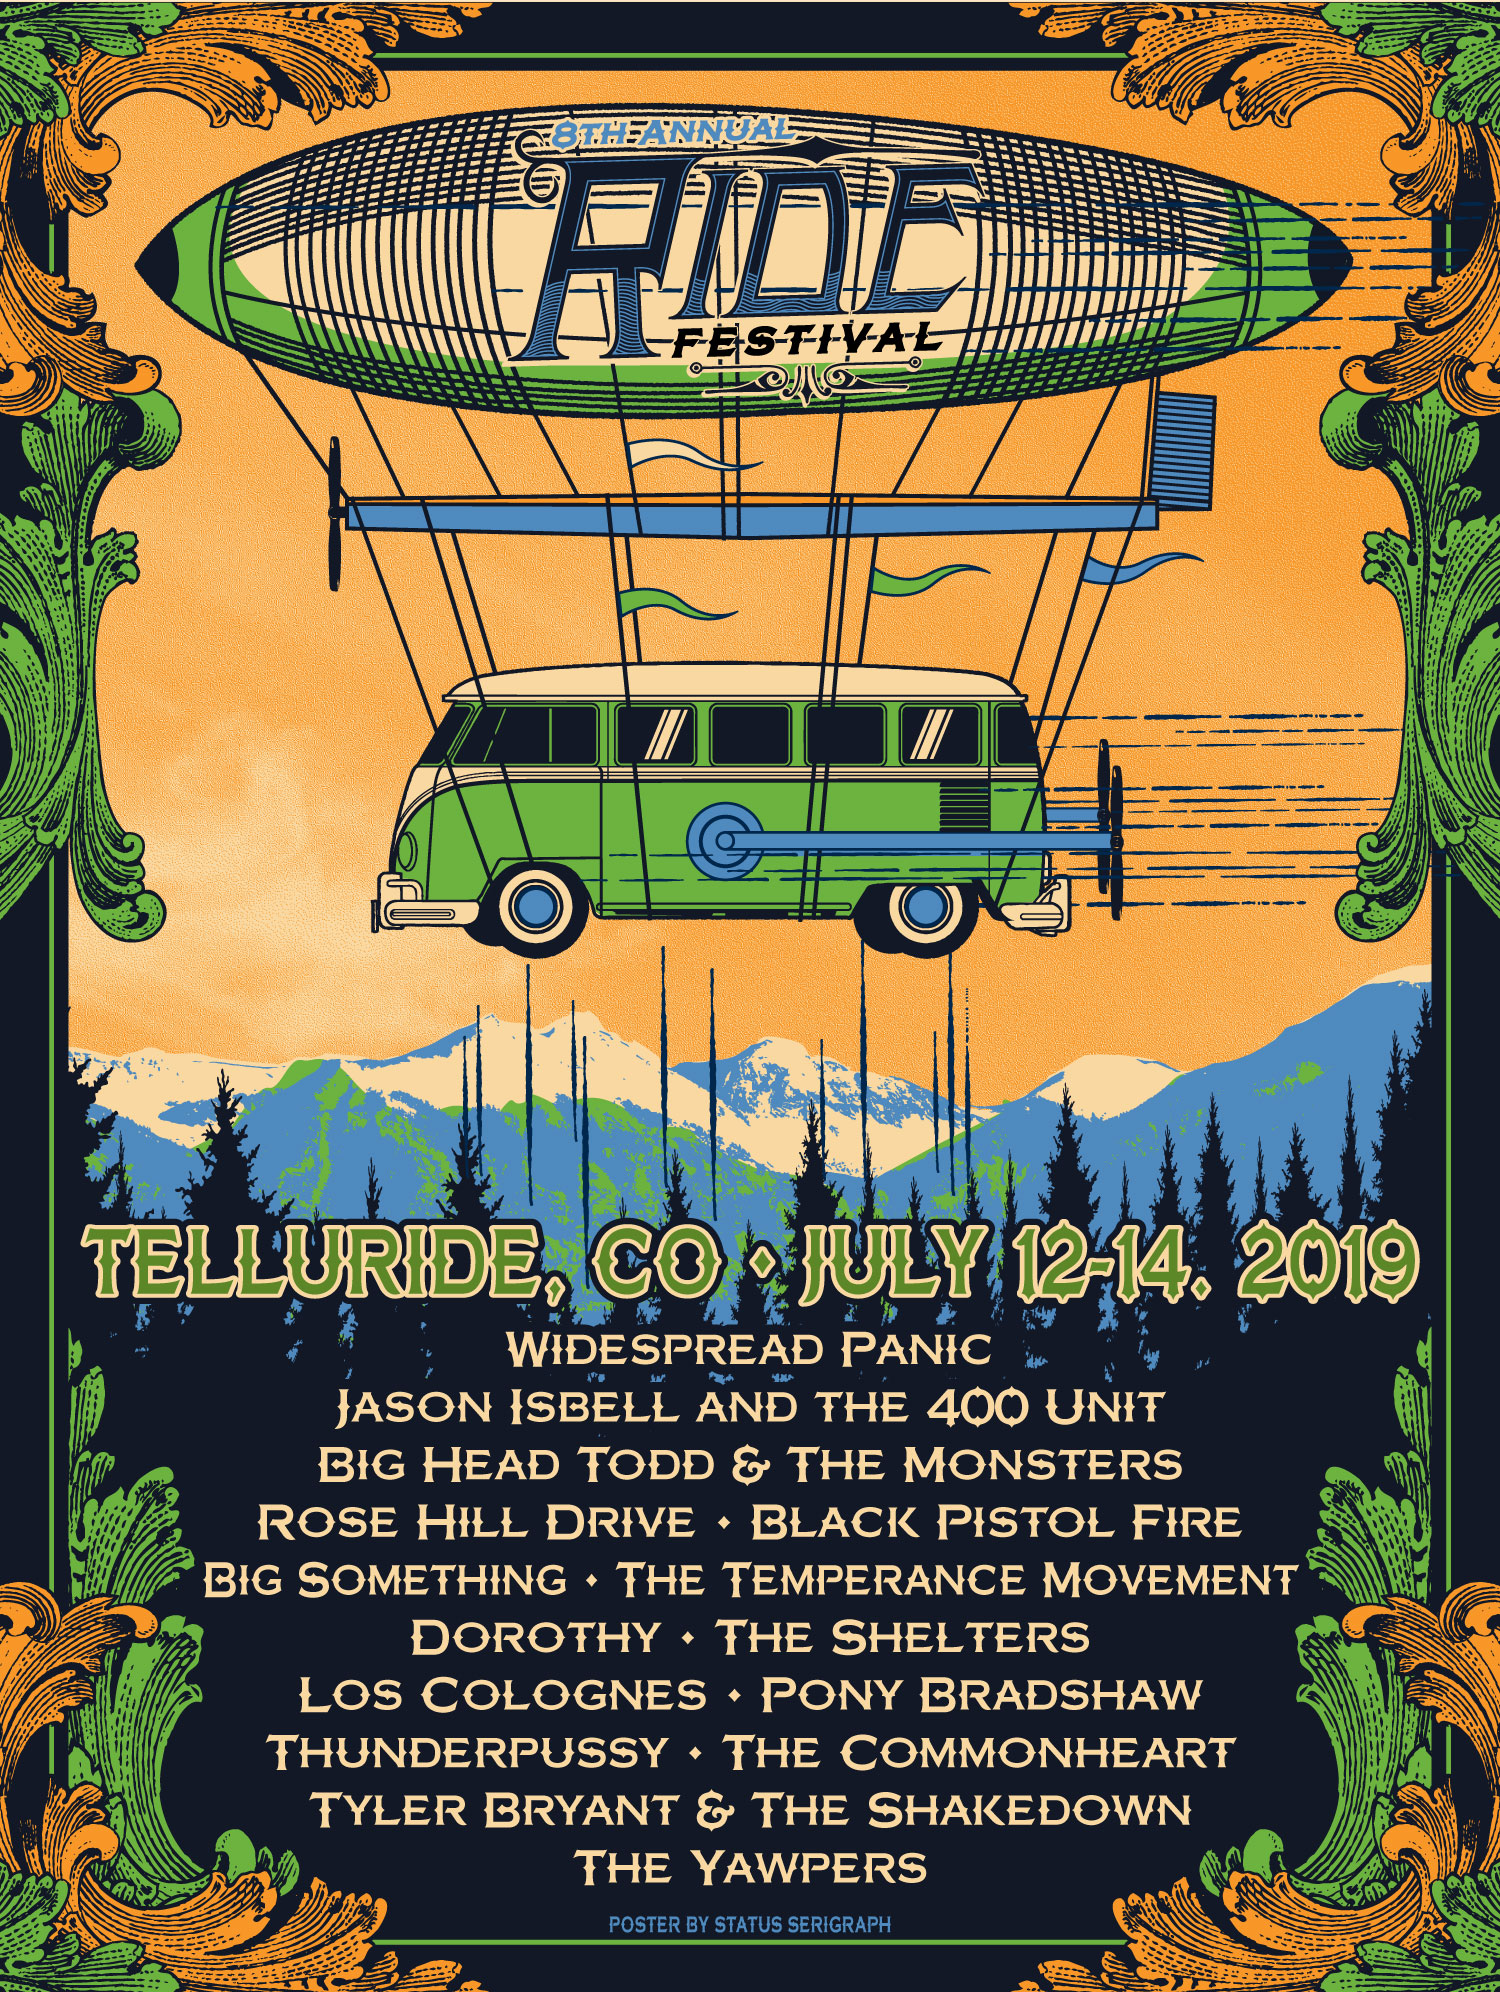 RIDE Festival Announces 2019 Lineup & Addition of Third Day